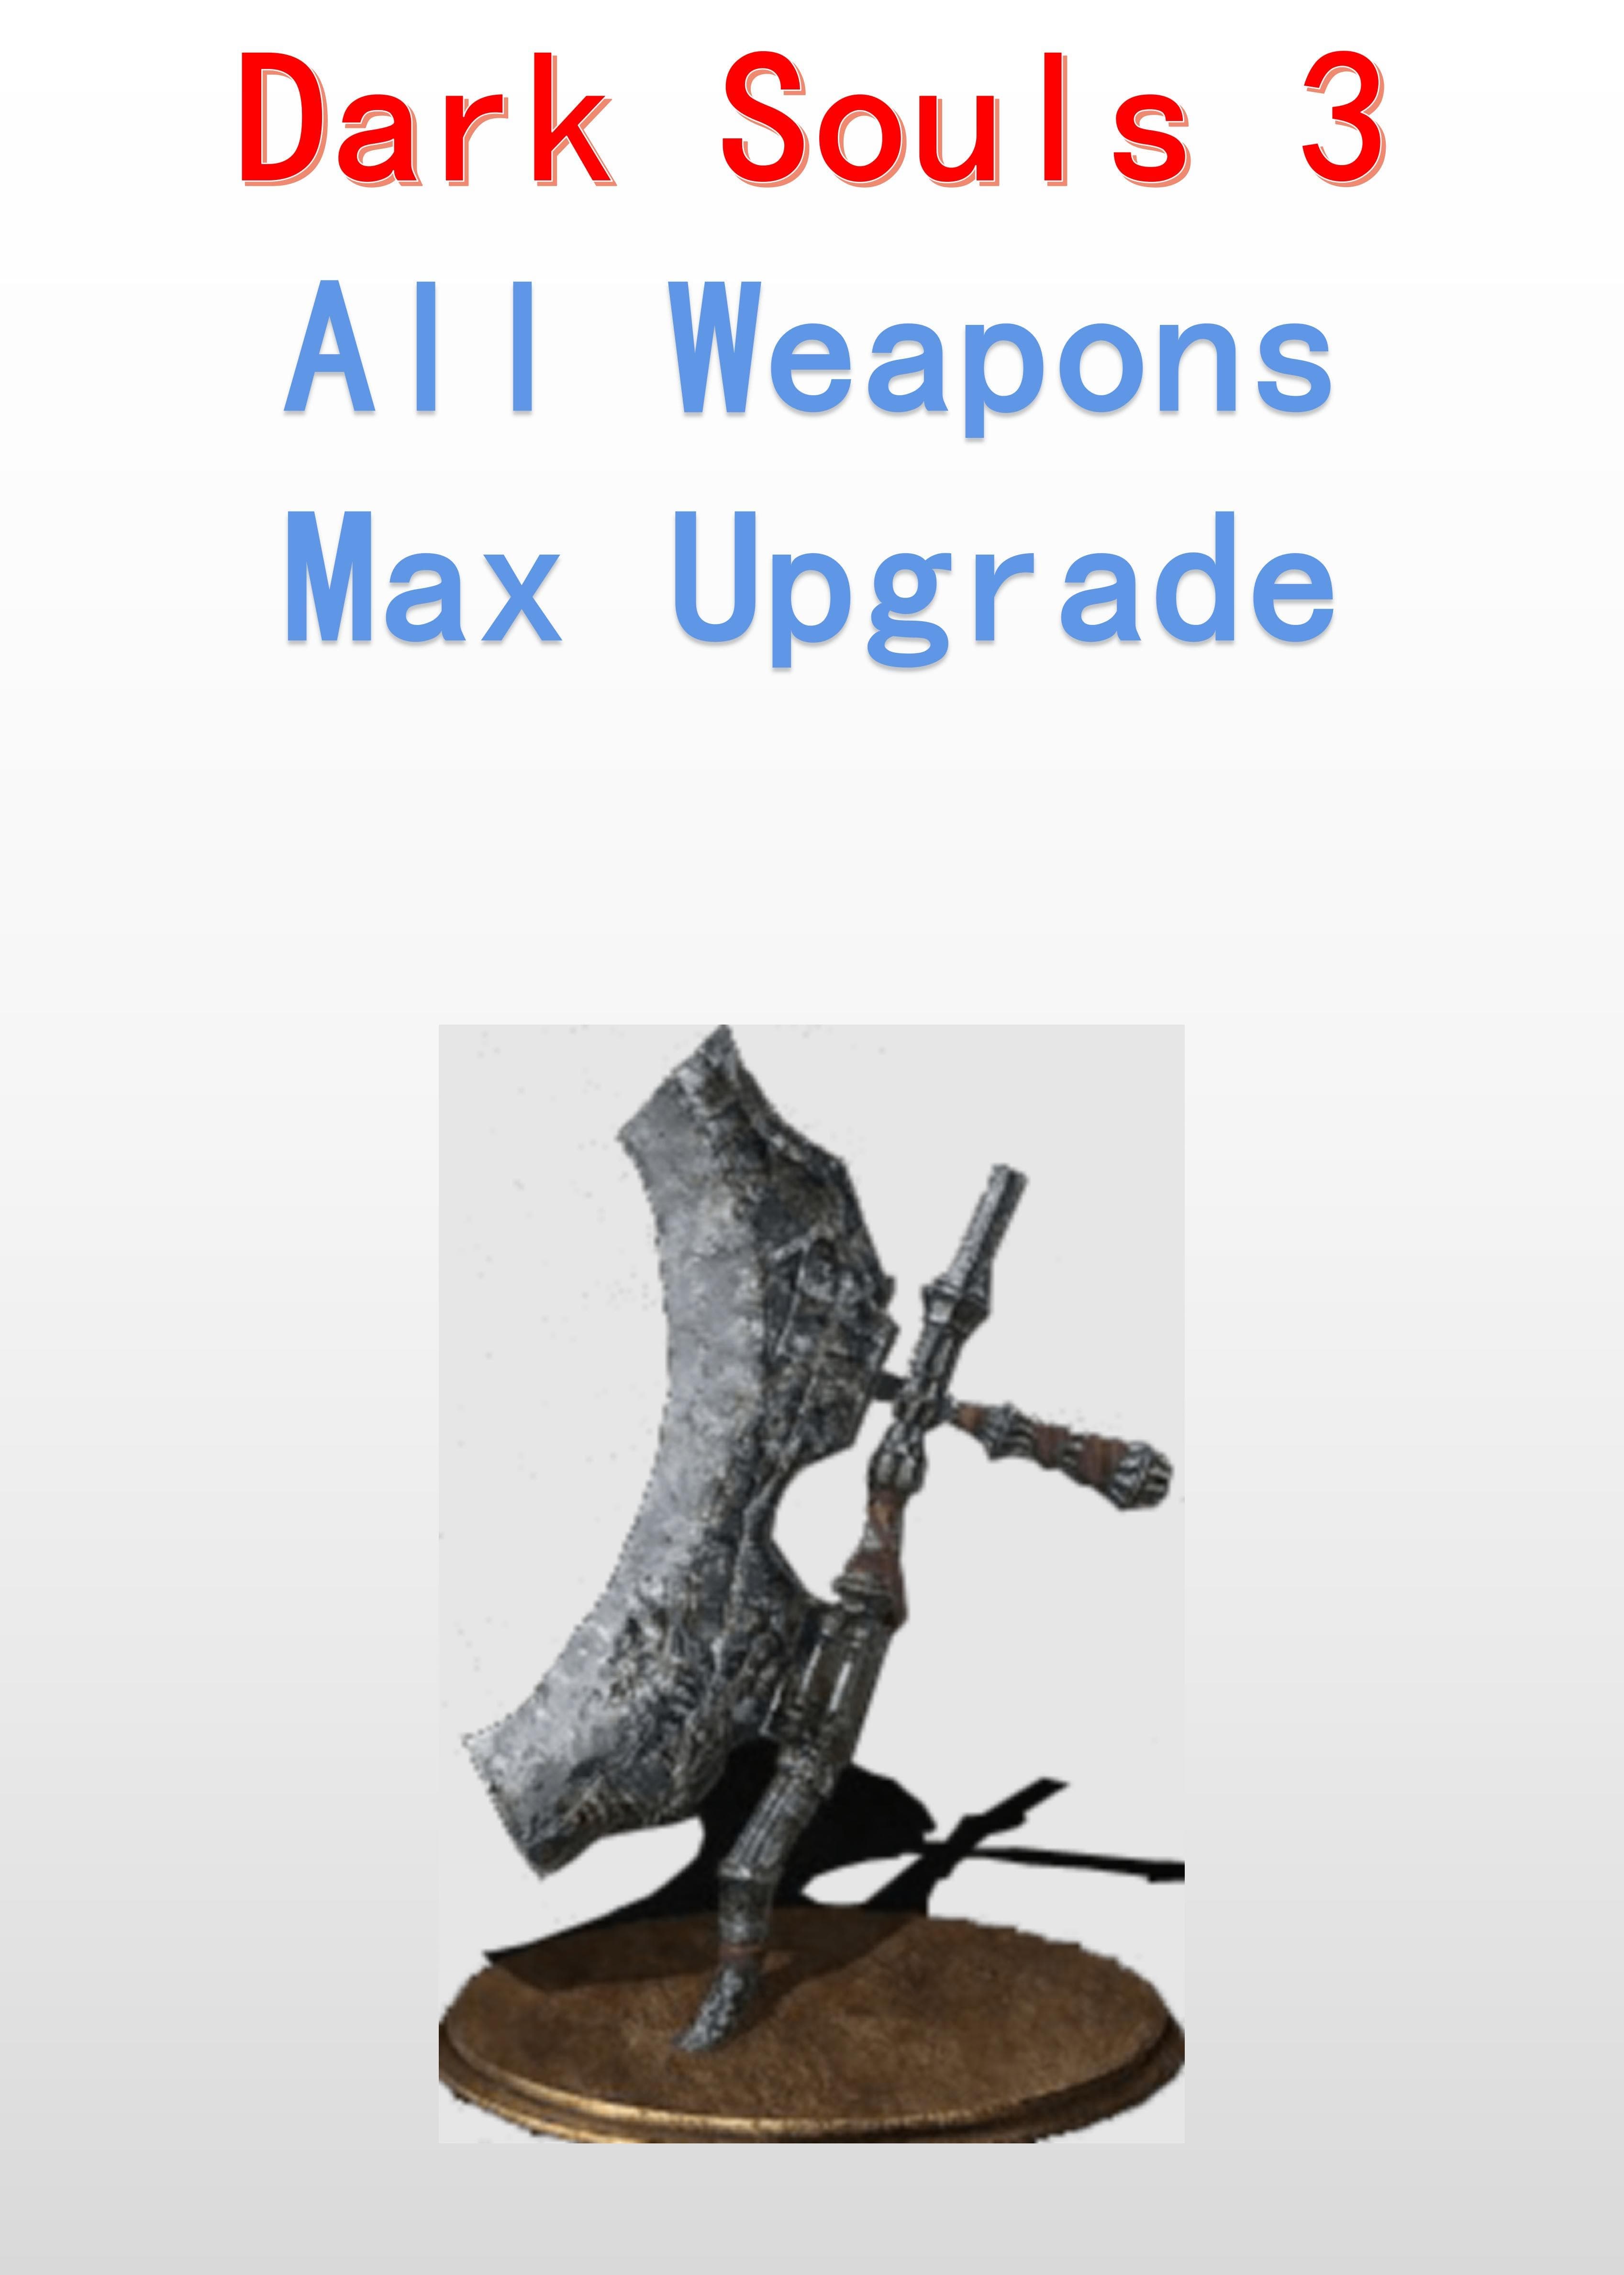 All Weapons Max Upgraded - Dark Souls 3